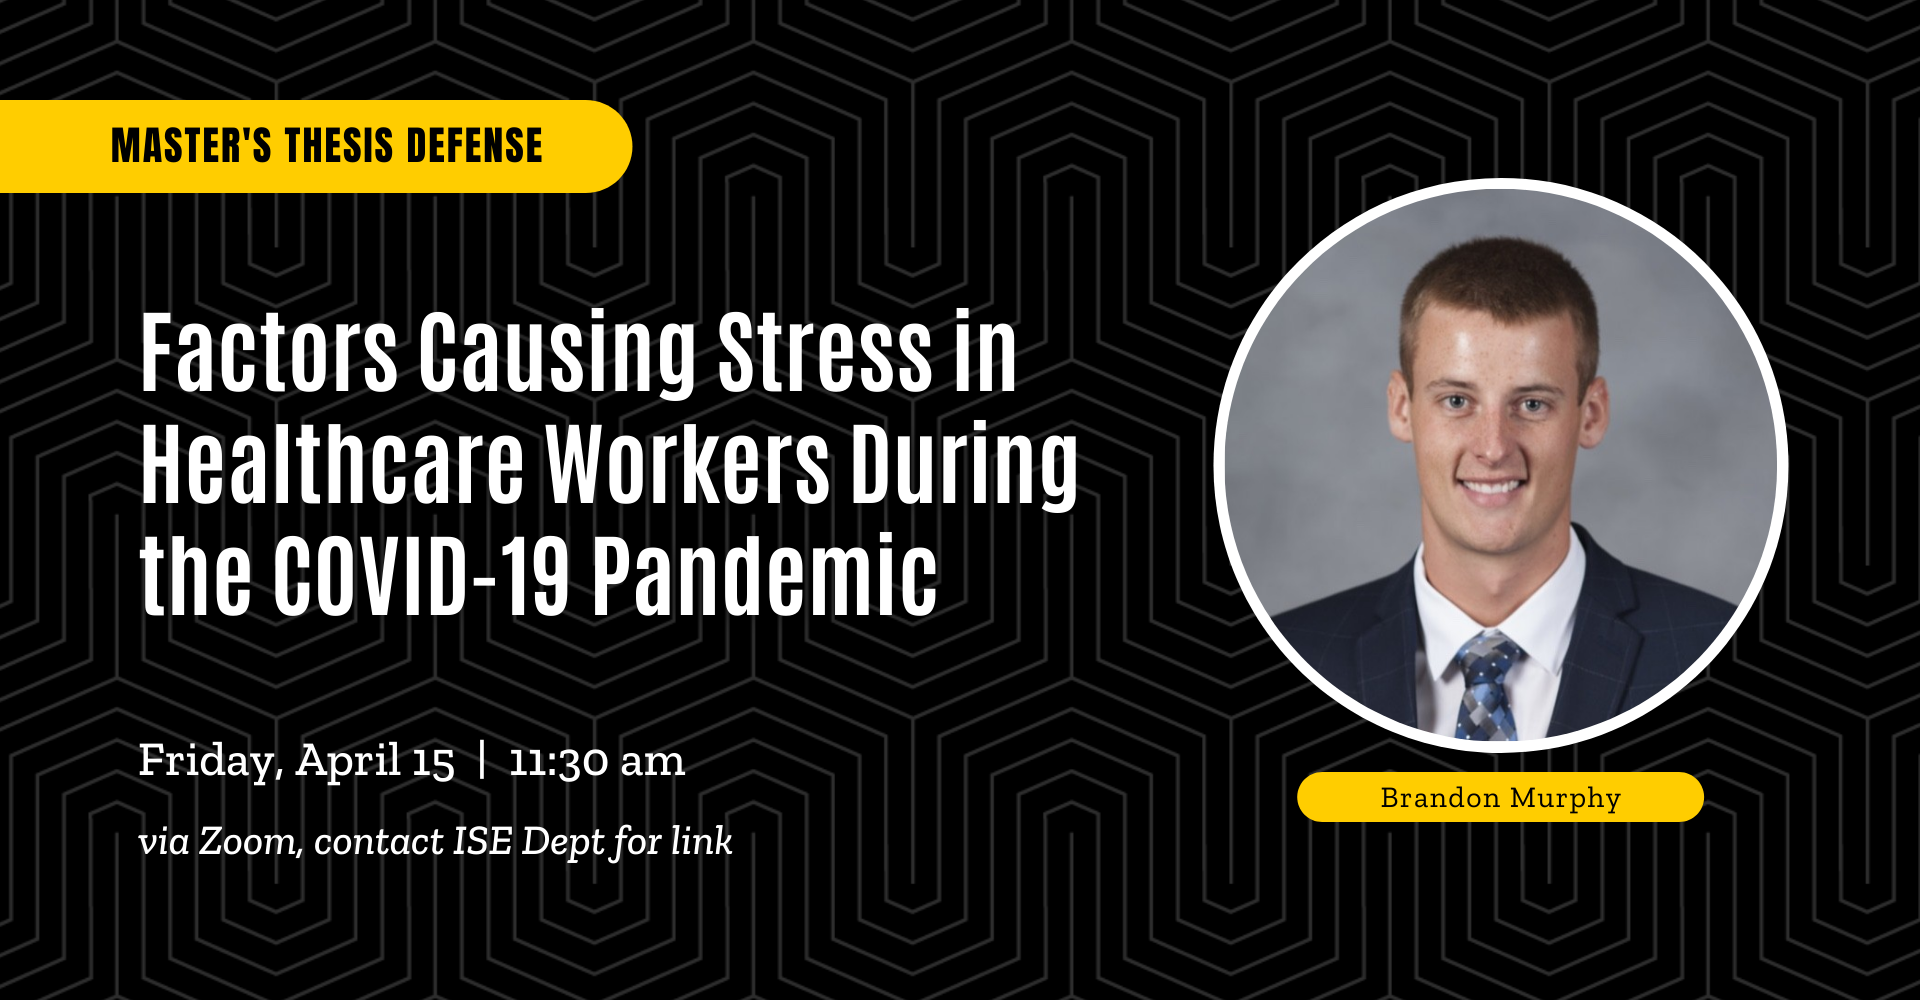 Factors Causing Stress in Healthcare Workers During the COVID-19 Pandemic